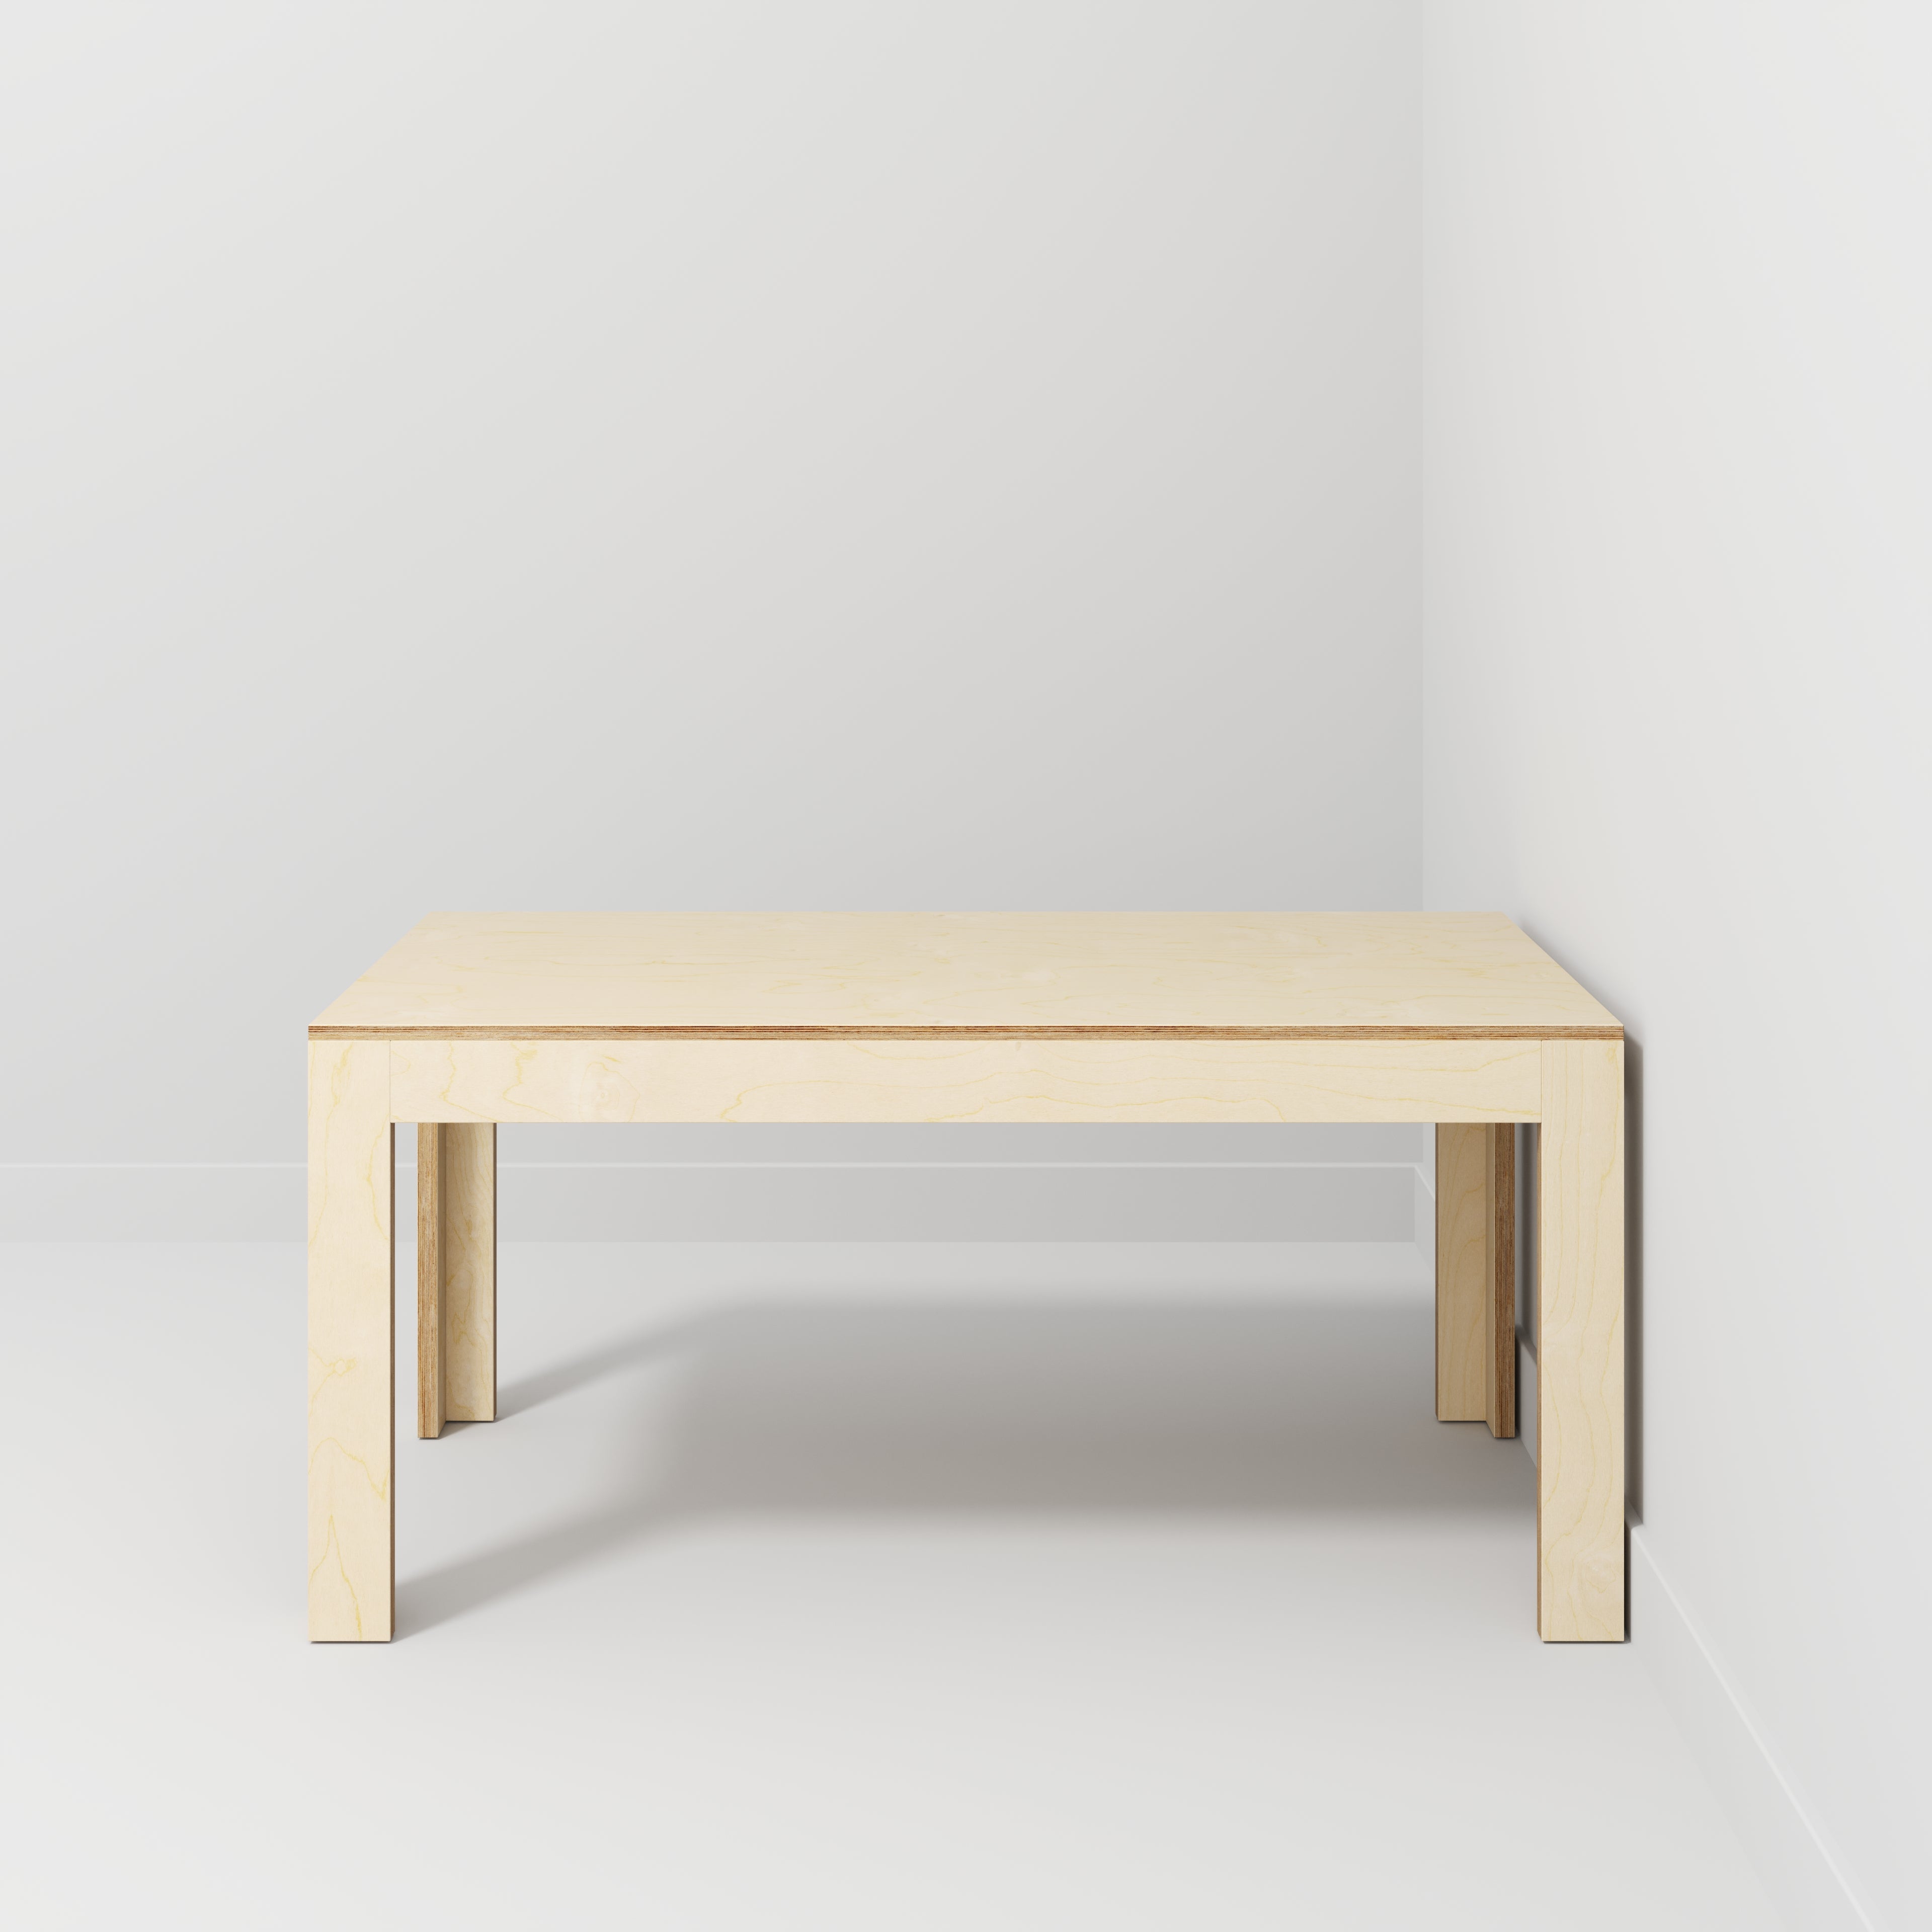 Custom Plywood Table with Solid Frame